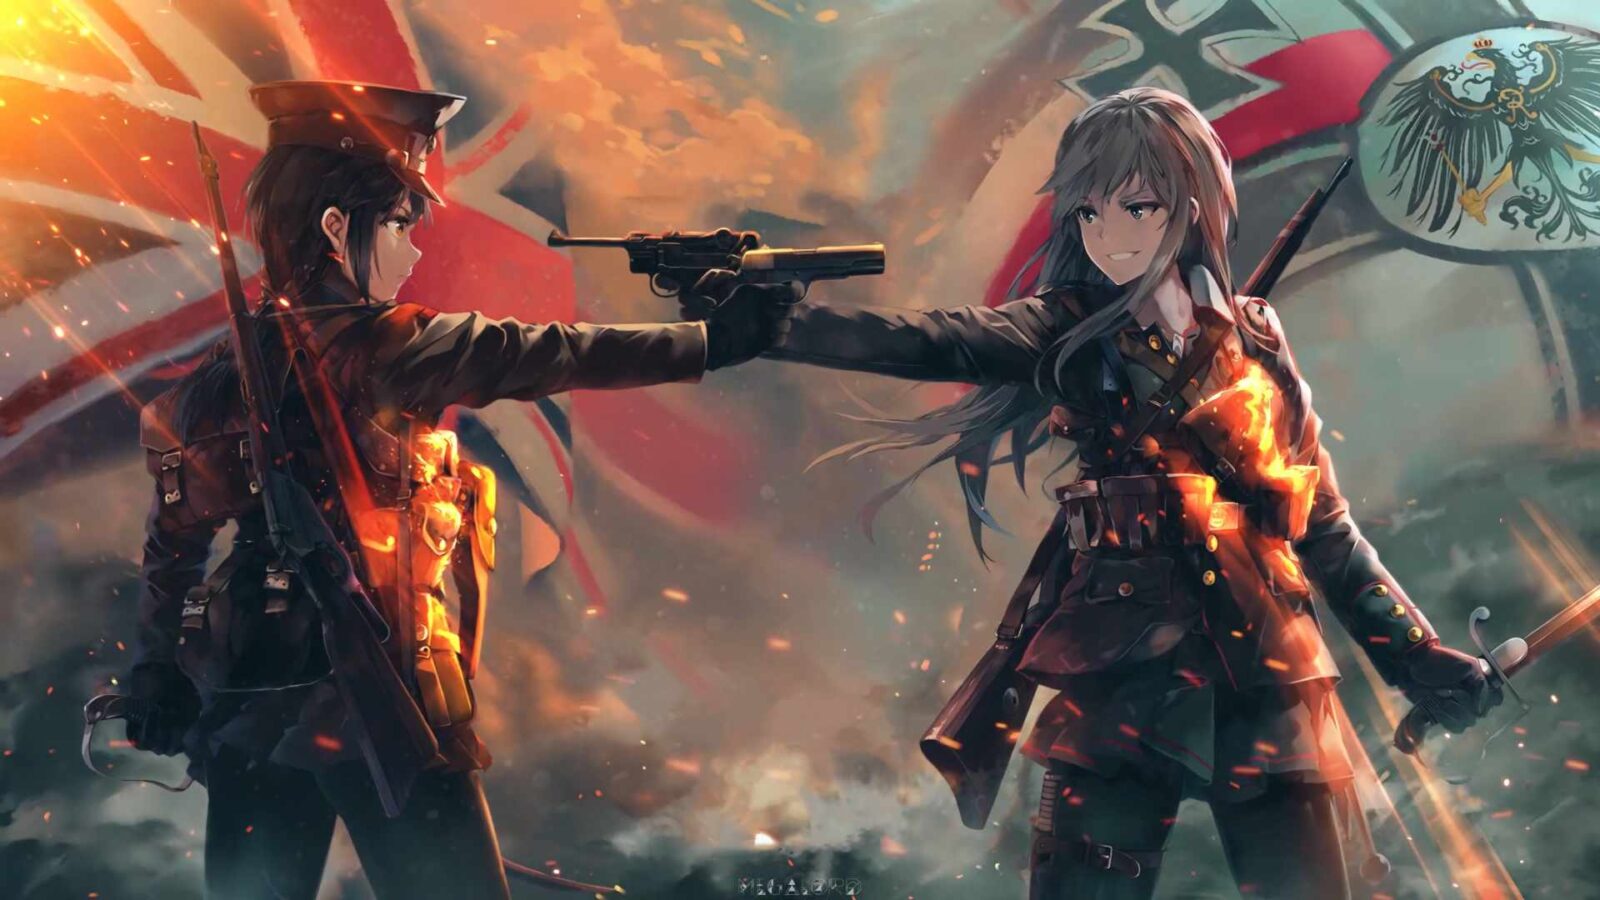 LiveWallpapers4Free.com | The Great War Anime Girls and Guns - Free Live Wallpaper